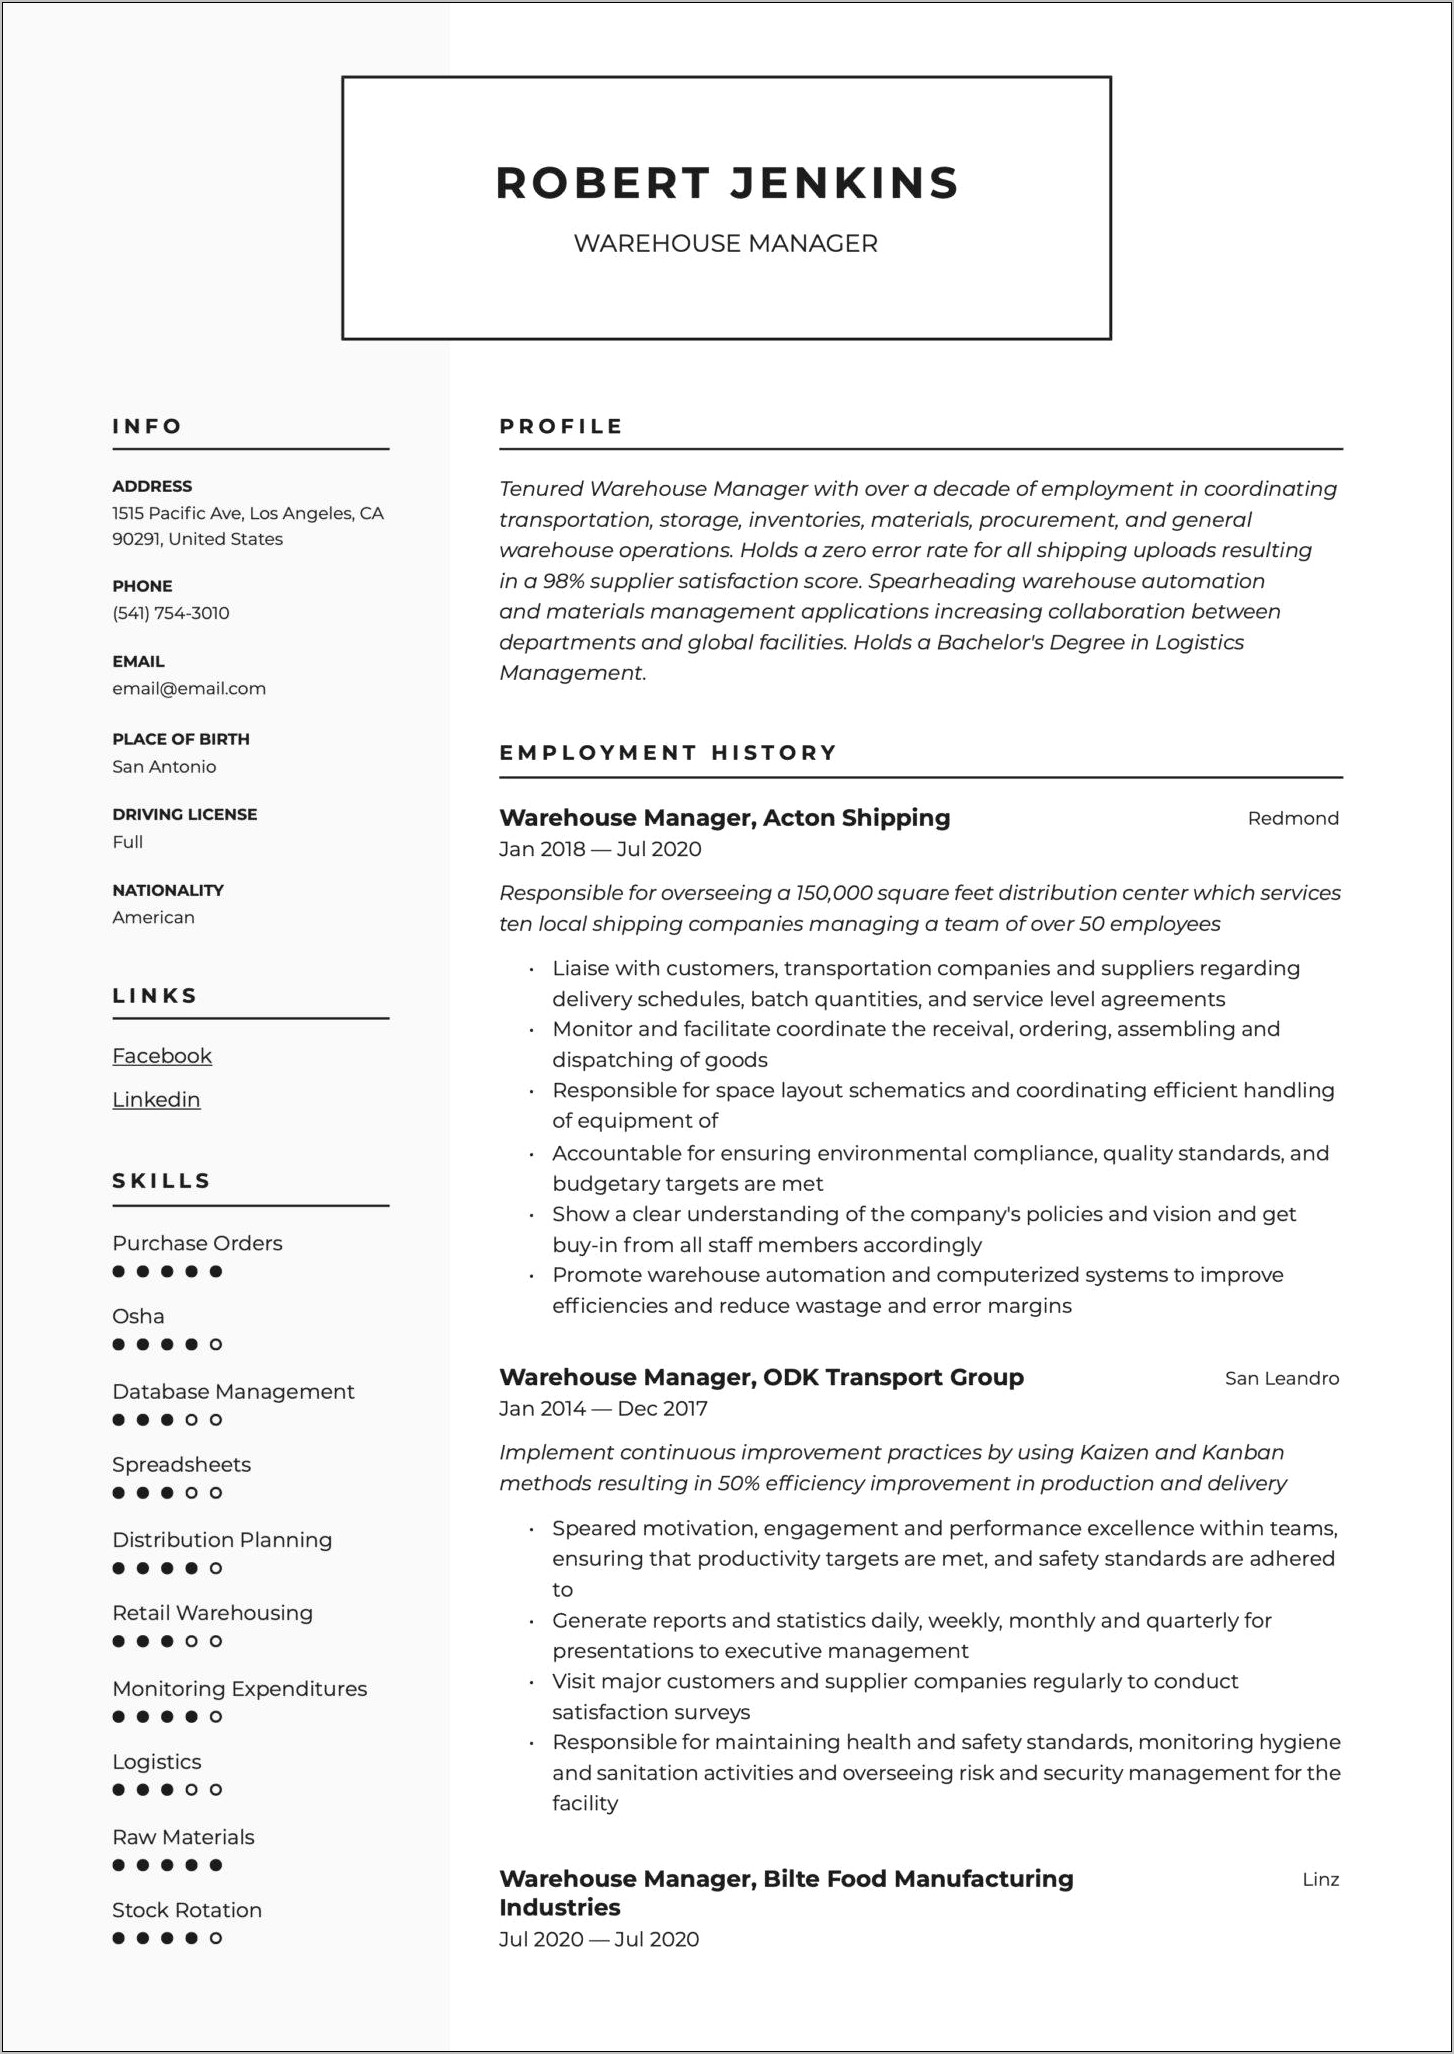 Warehouse Manager Resume With Erp